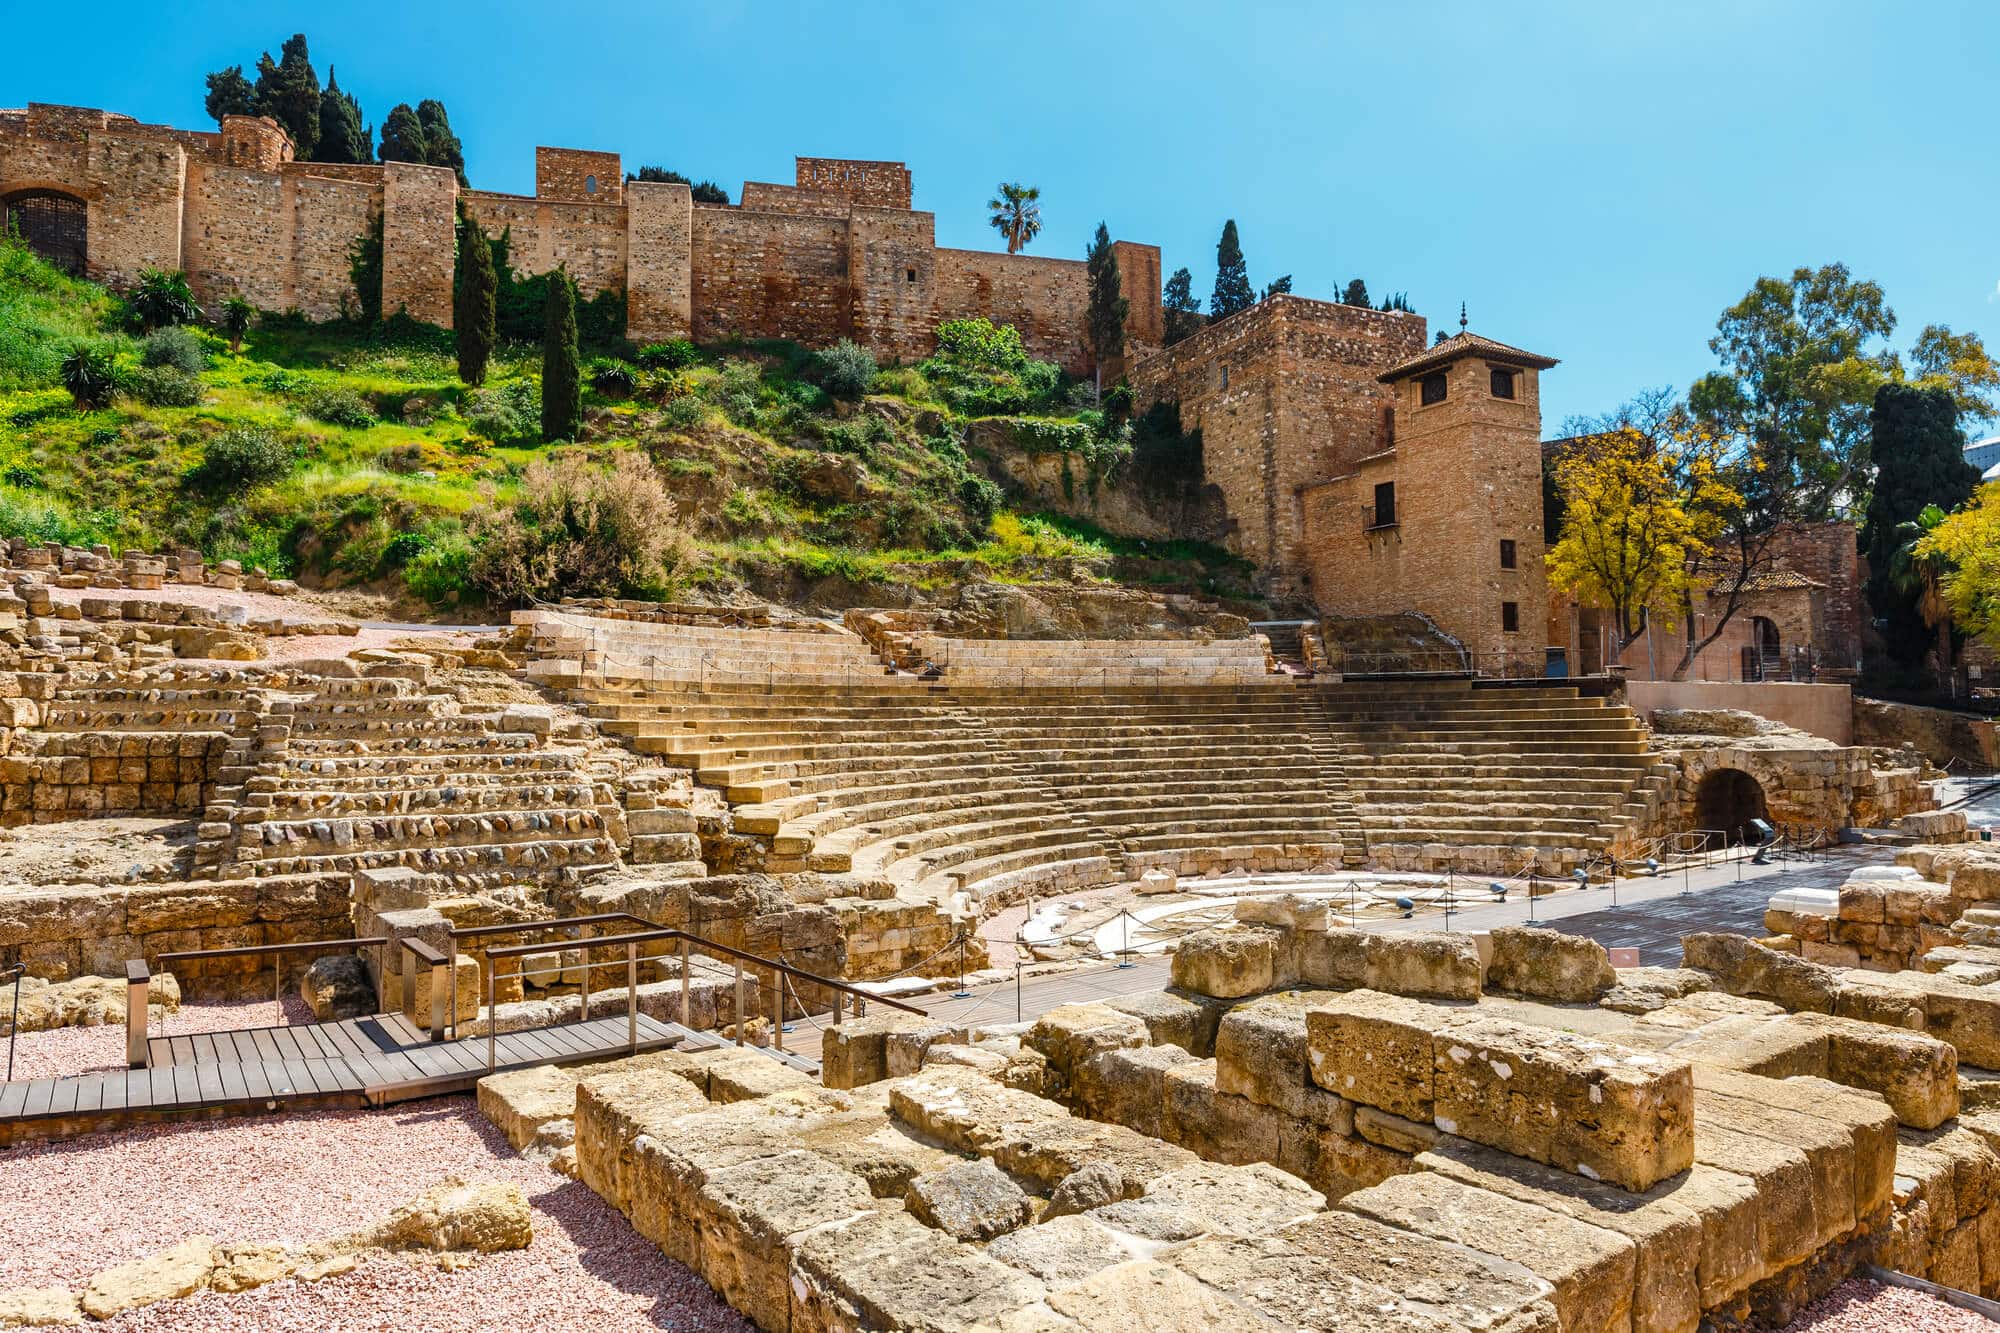 View of the old Roman Theatre ruins in Malaga Old Town with the Alcazaba and greenery in the background on a sunny day.